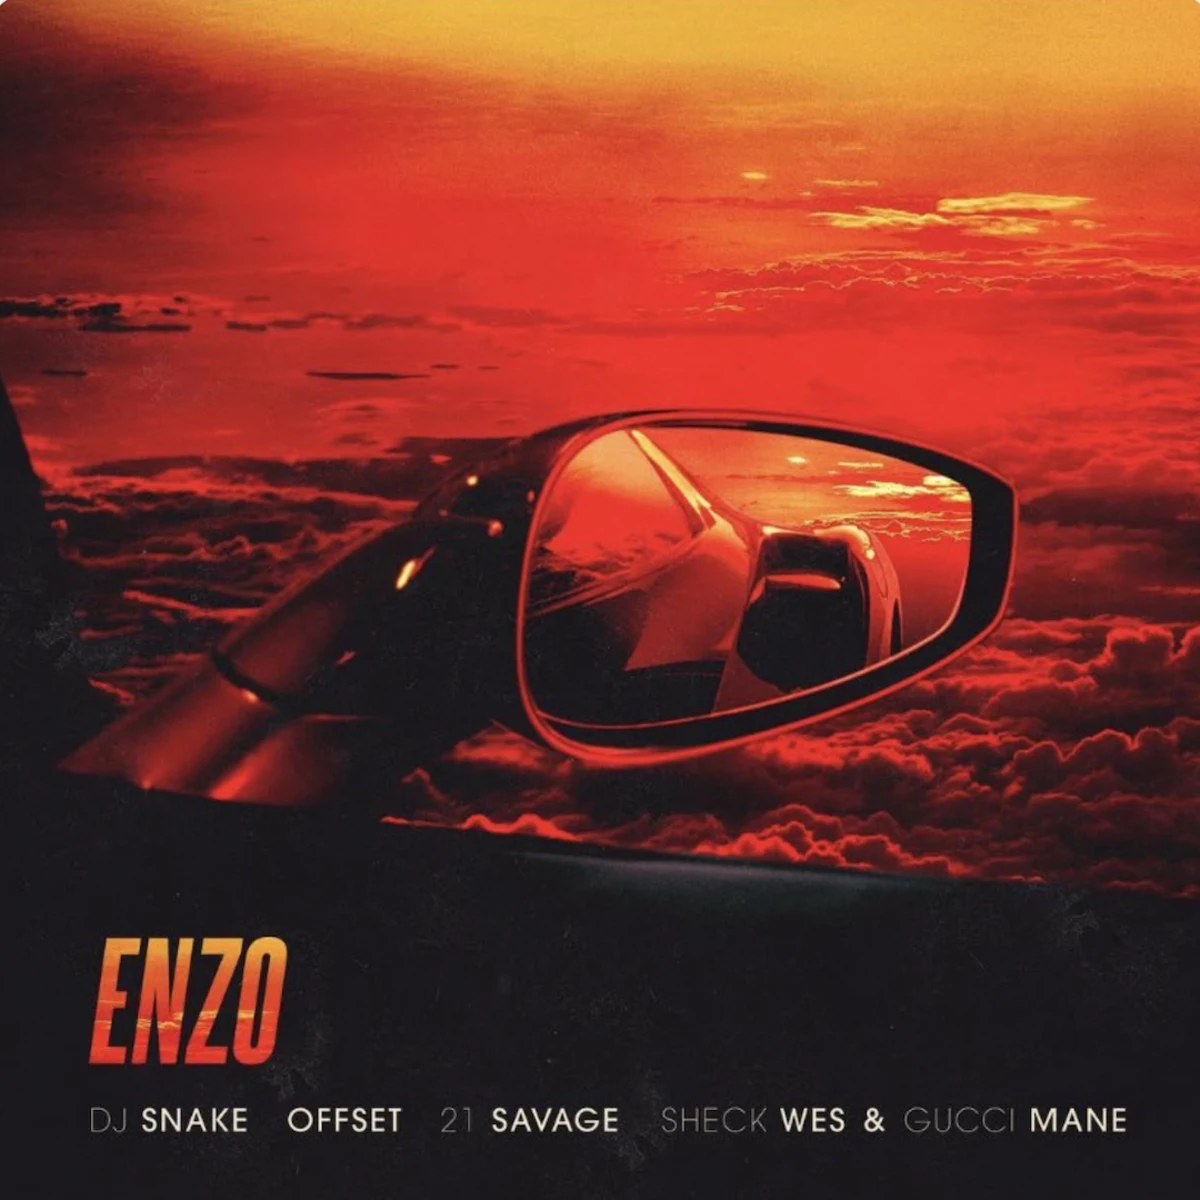 21 Savage, Offset and More Join DJ Snake for New Song "Enzo" - XXL